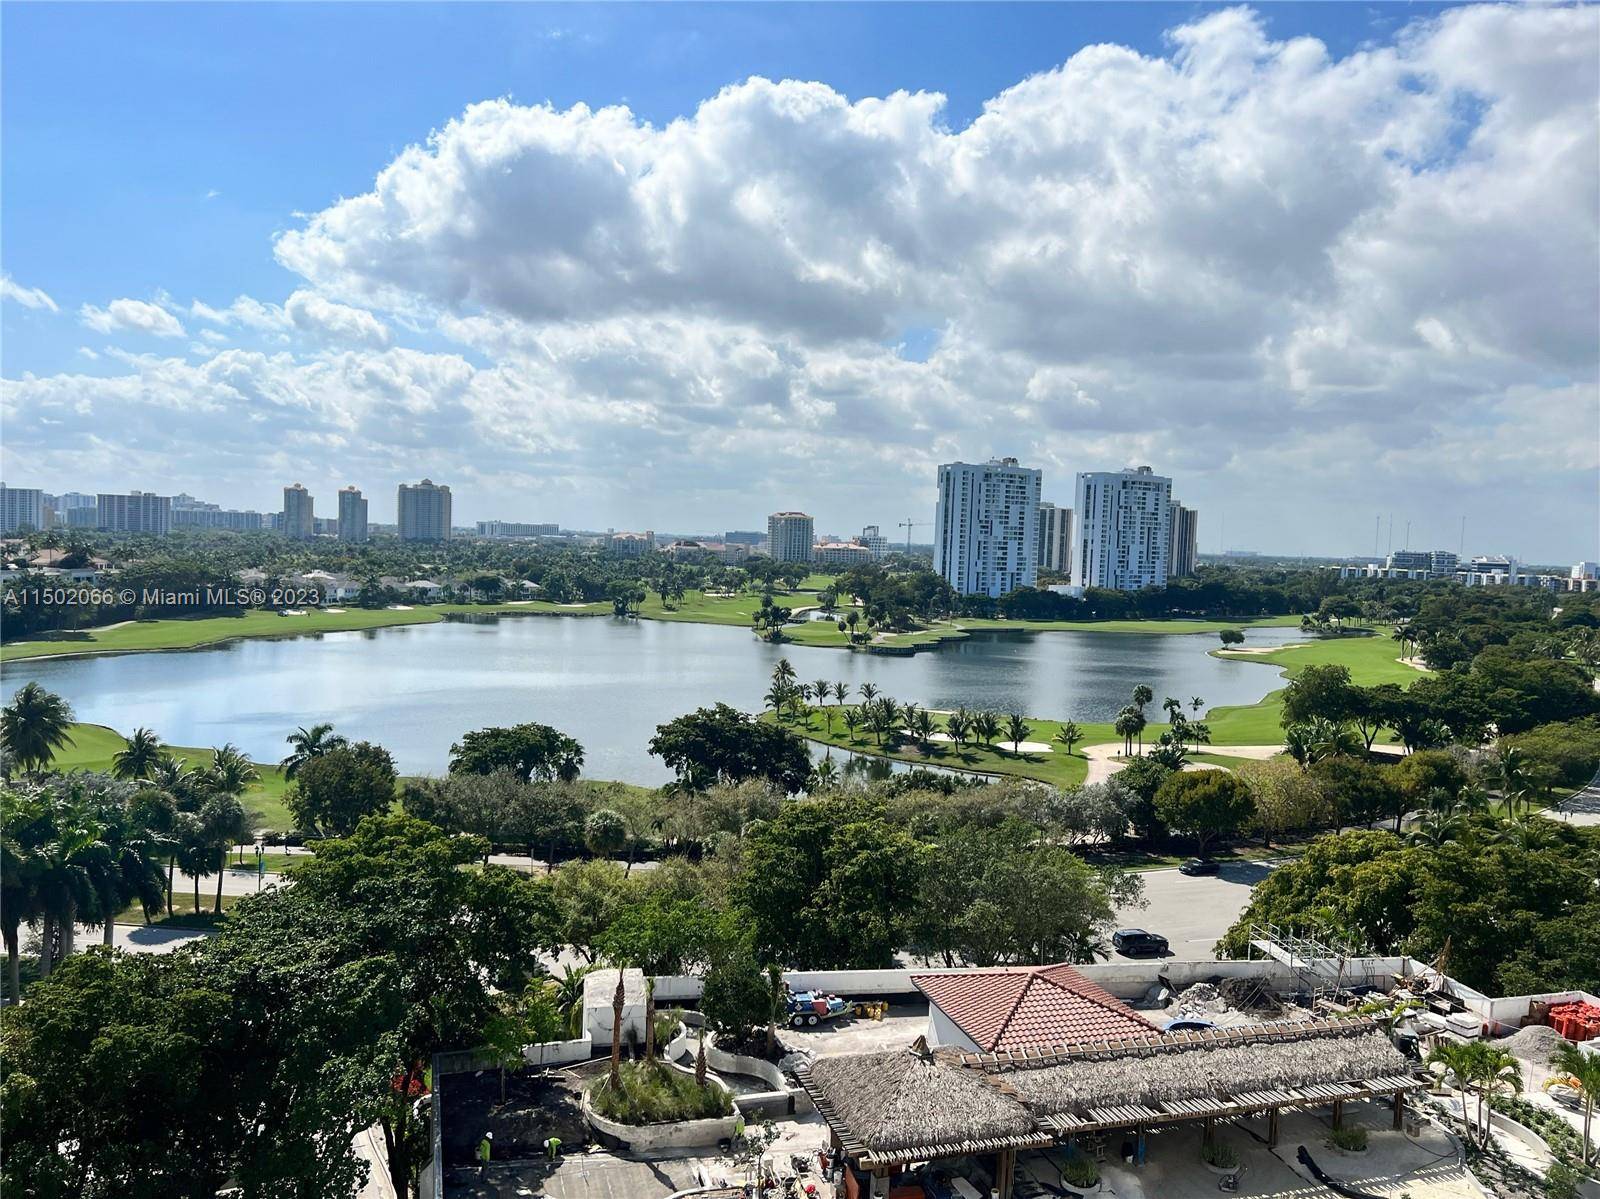 Large 2 2 condo in Aventura, near the mall and other shopping areas, also close to beaches and US1 and 2 international airports.